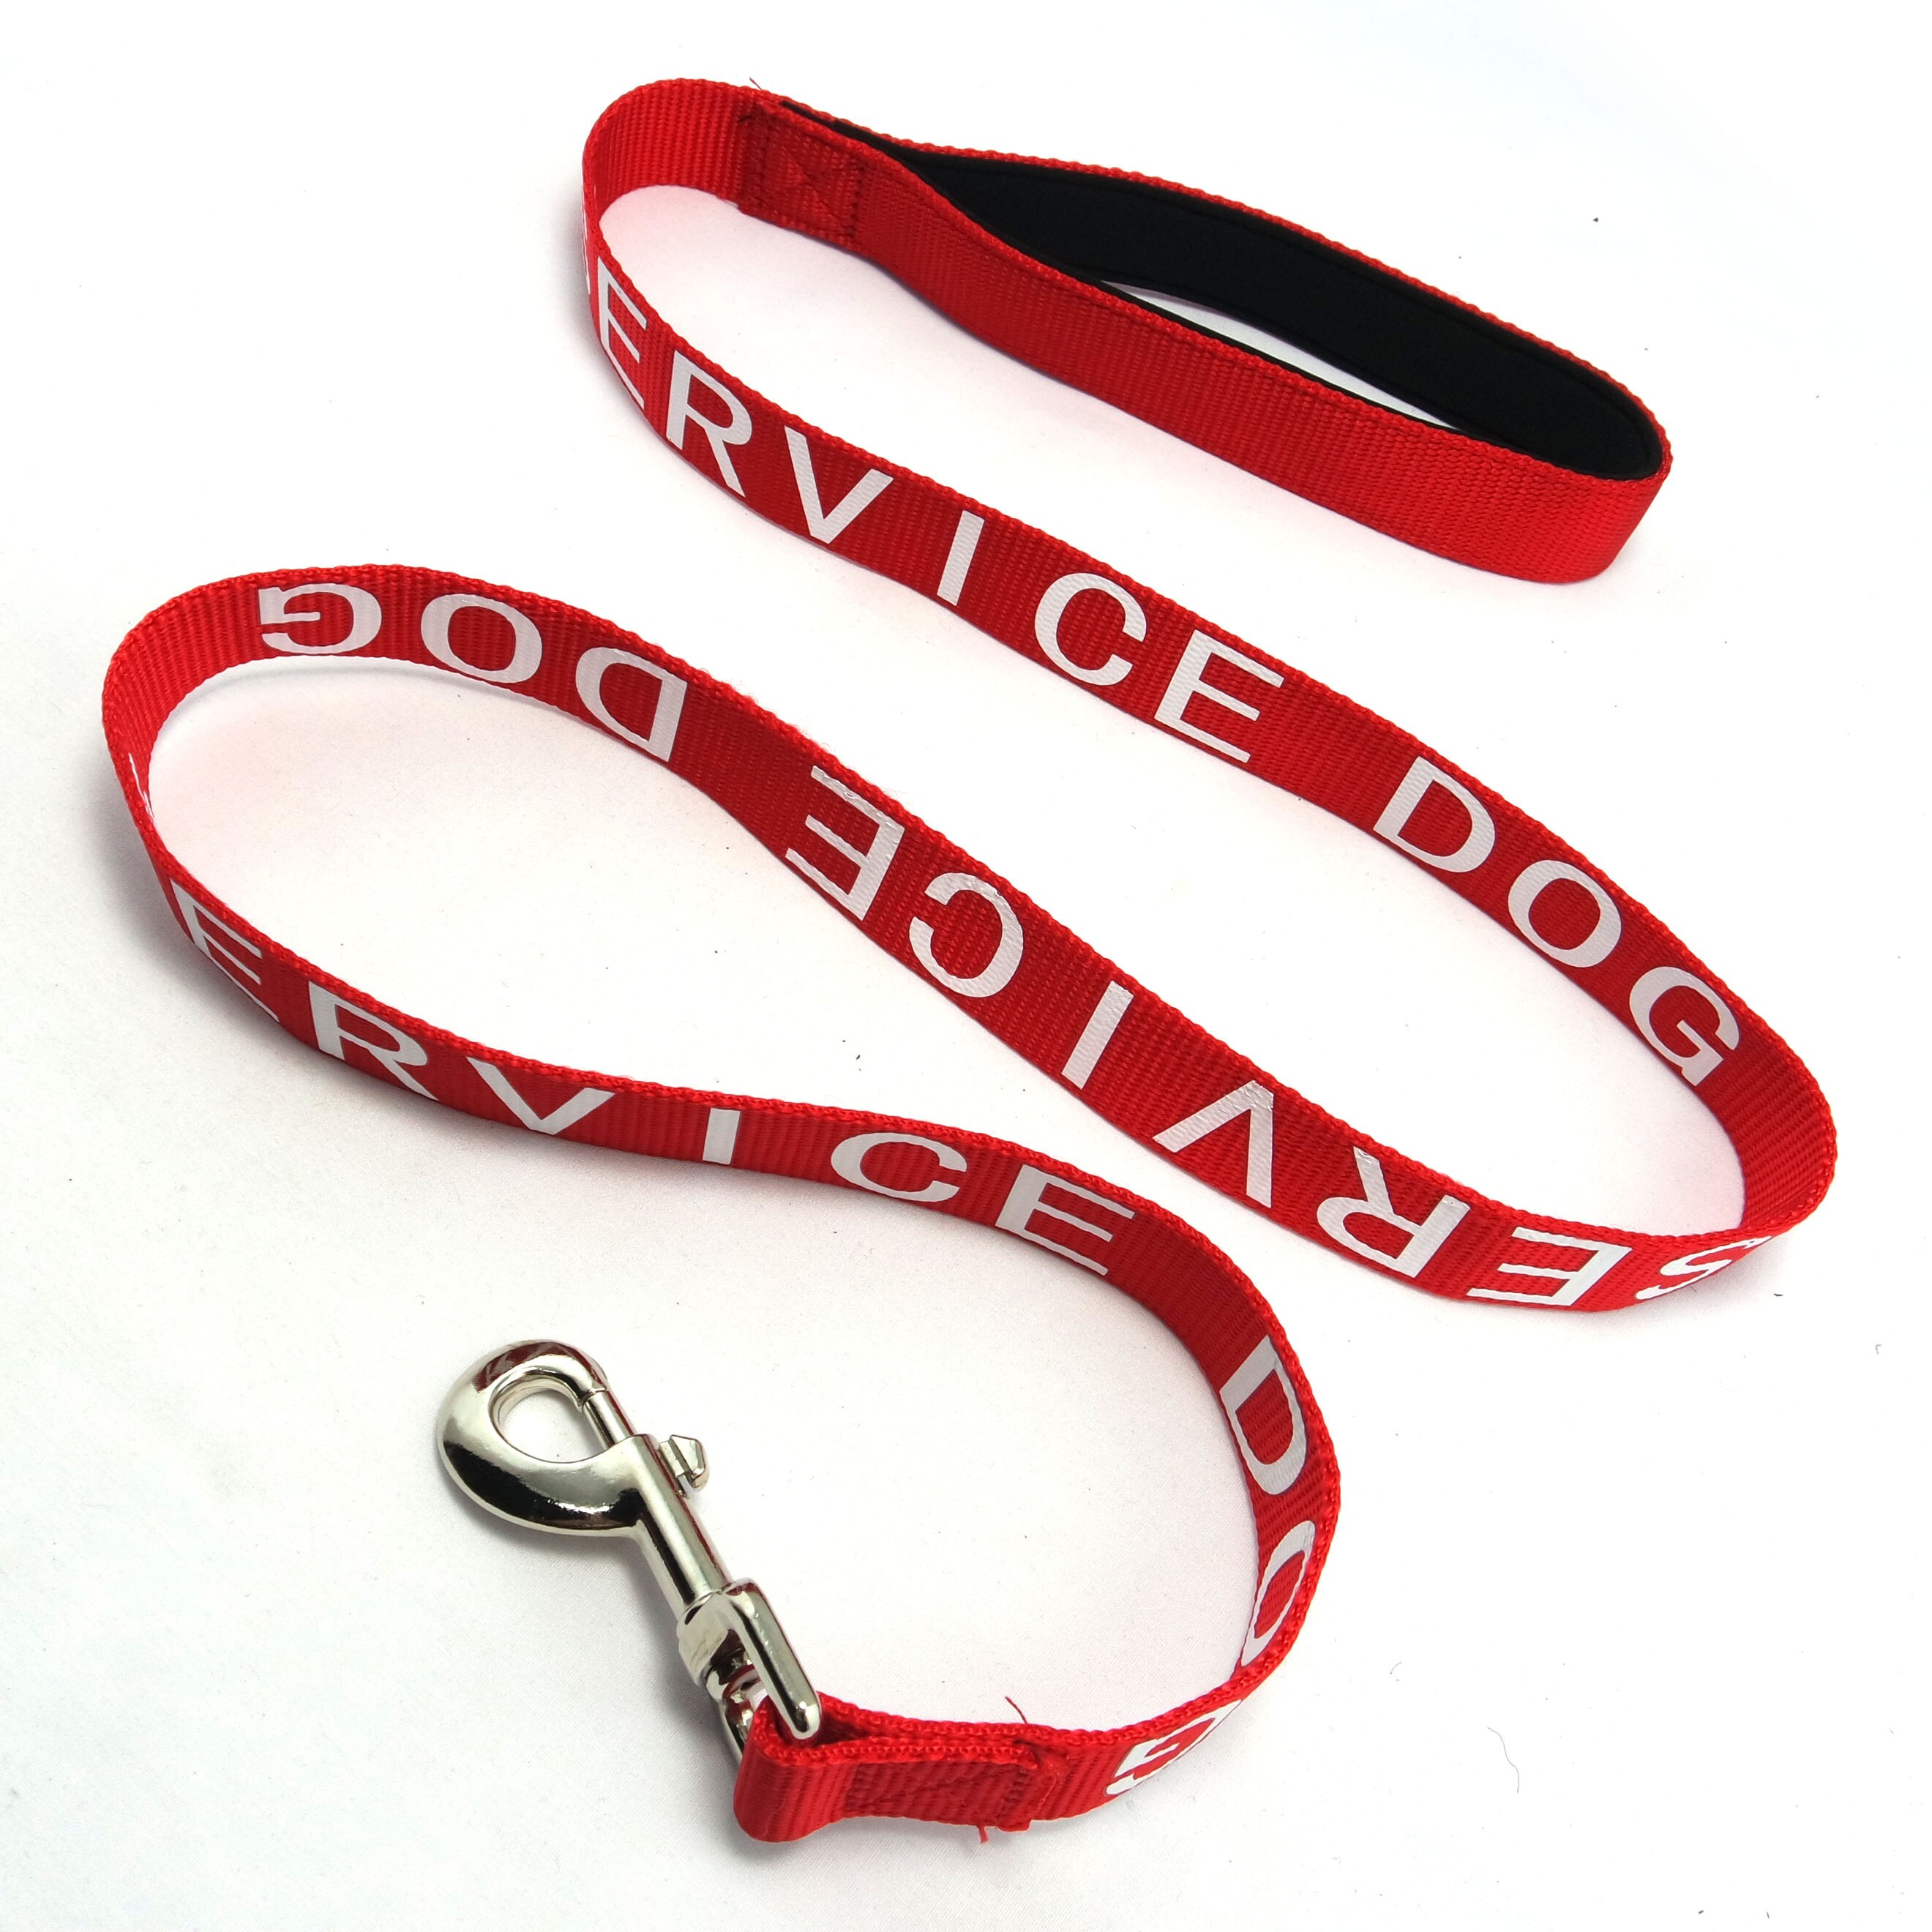 Service Dog Leash Wrap Emotional Support animal leash and Reflective Lettering Supplies or Accessories for Service Dog Vest: Red text 2